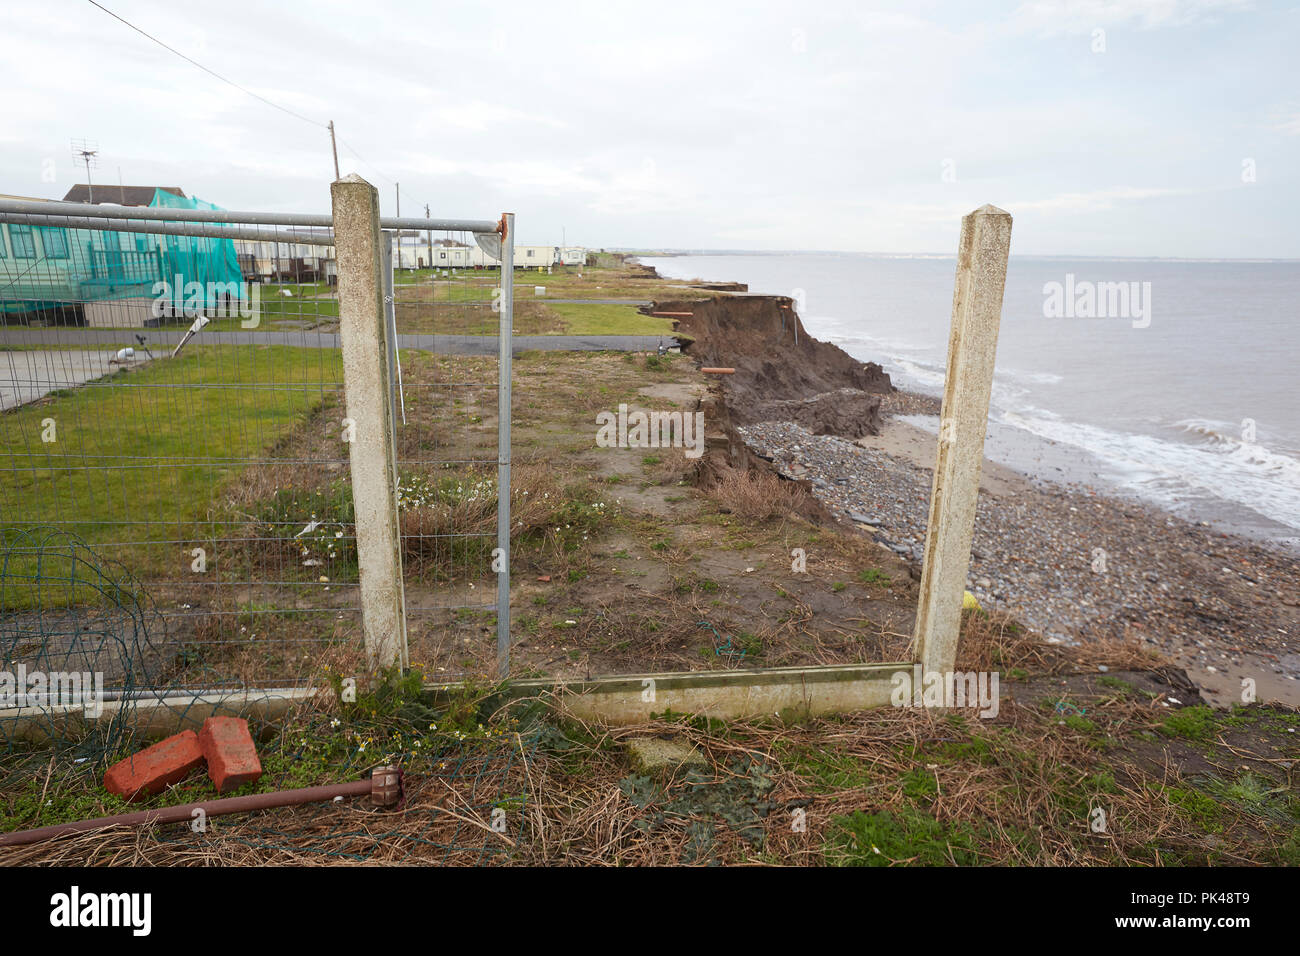 Coastal Erosion cliffs, remains of a caravan site that has collapsed into the North Sea, Ulrome, Skipsea, East Riding of Yorkshire, England, UK Stock Photo